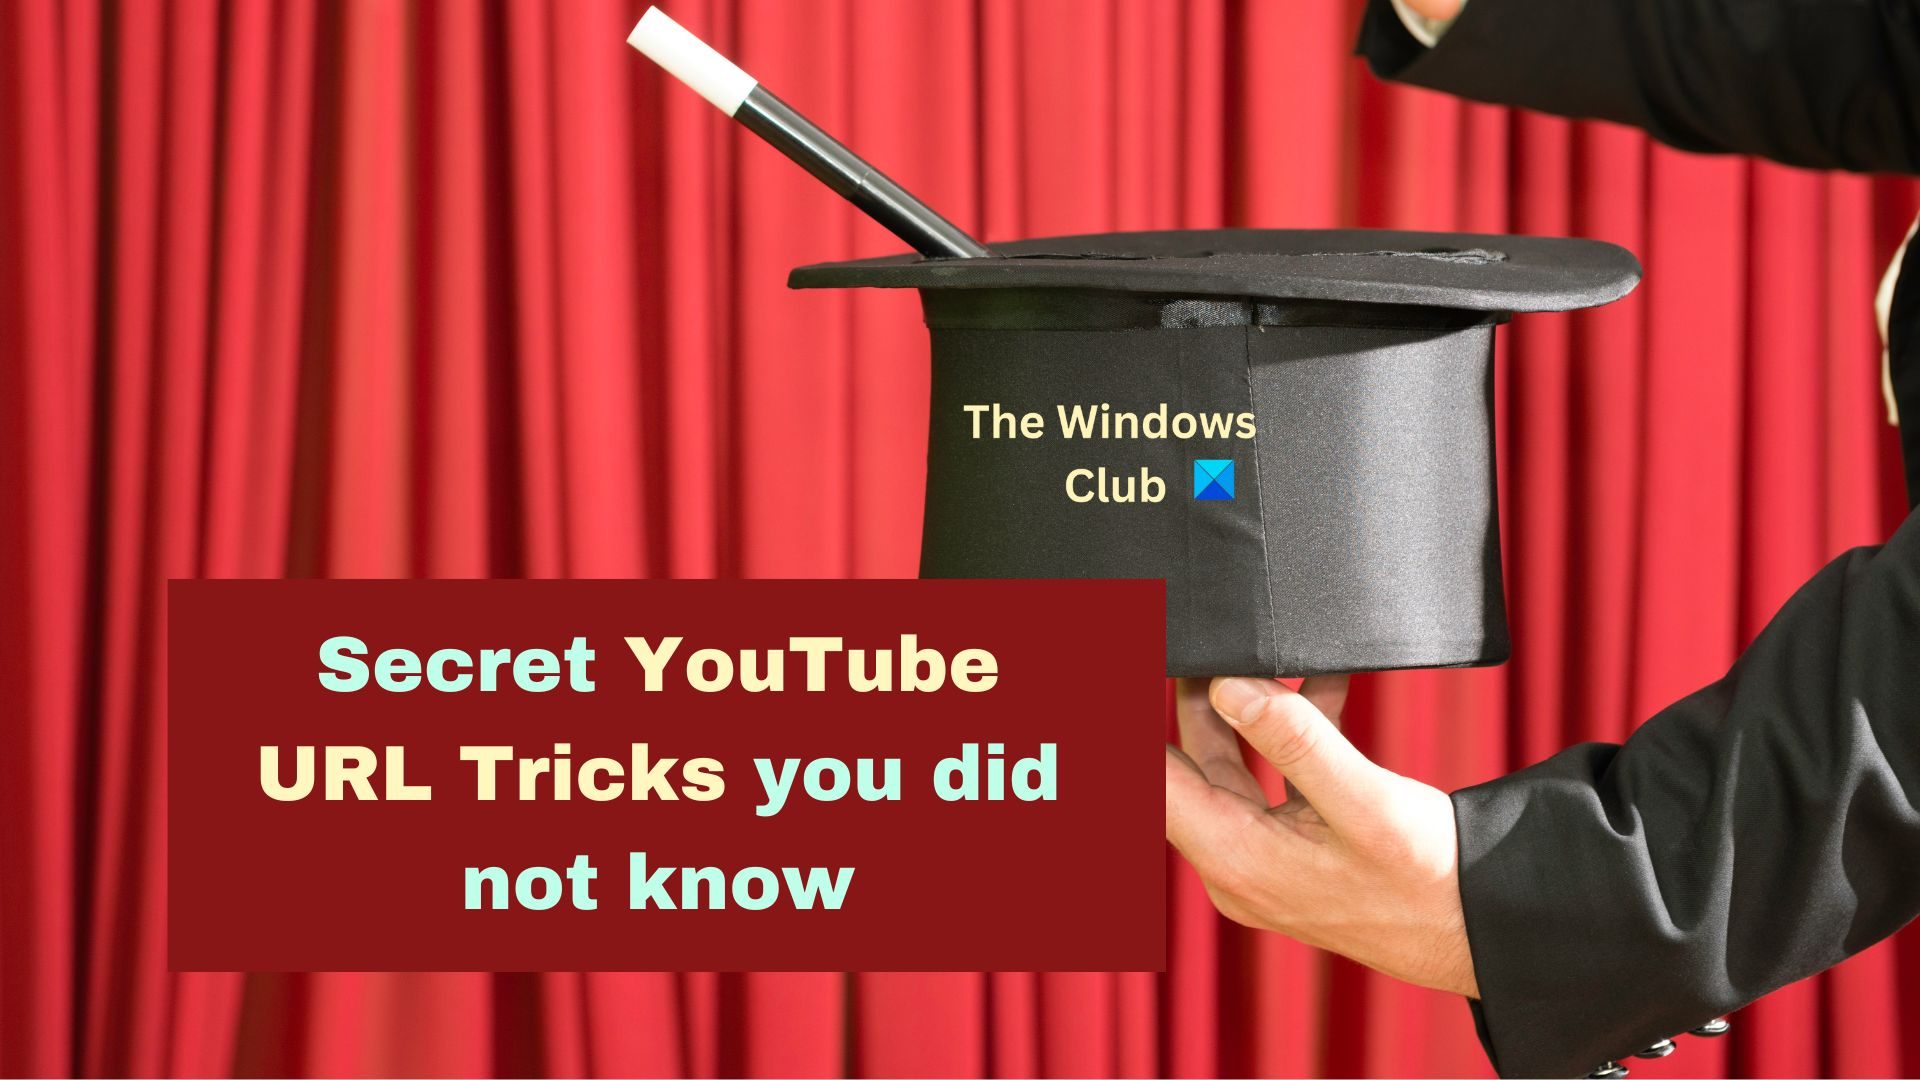 Secret YouTube URL Tricks you did not know